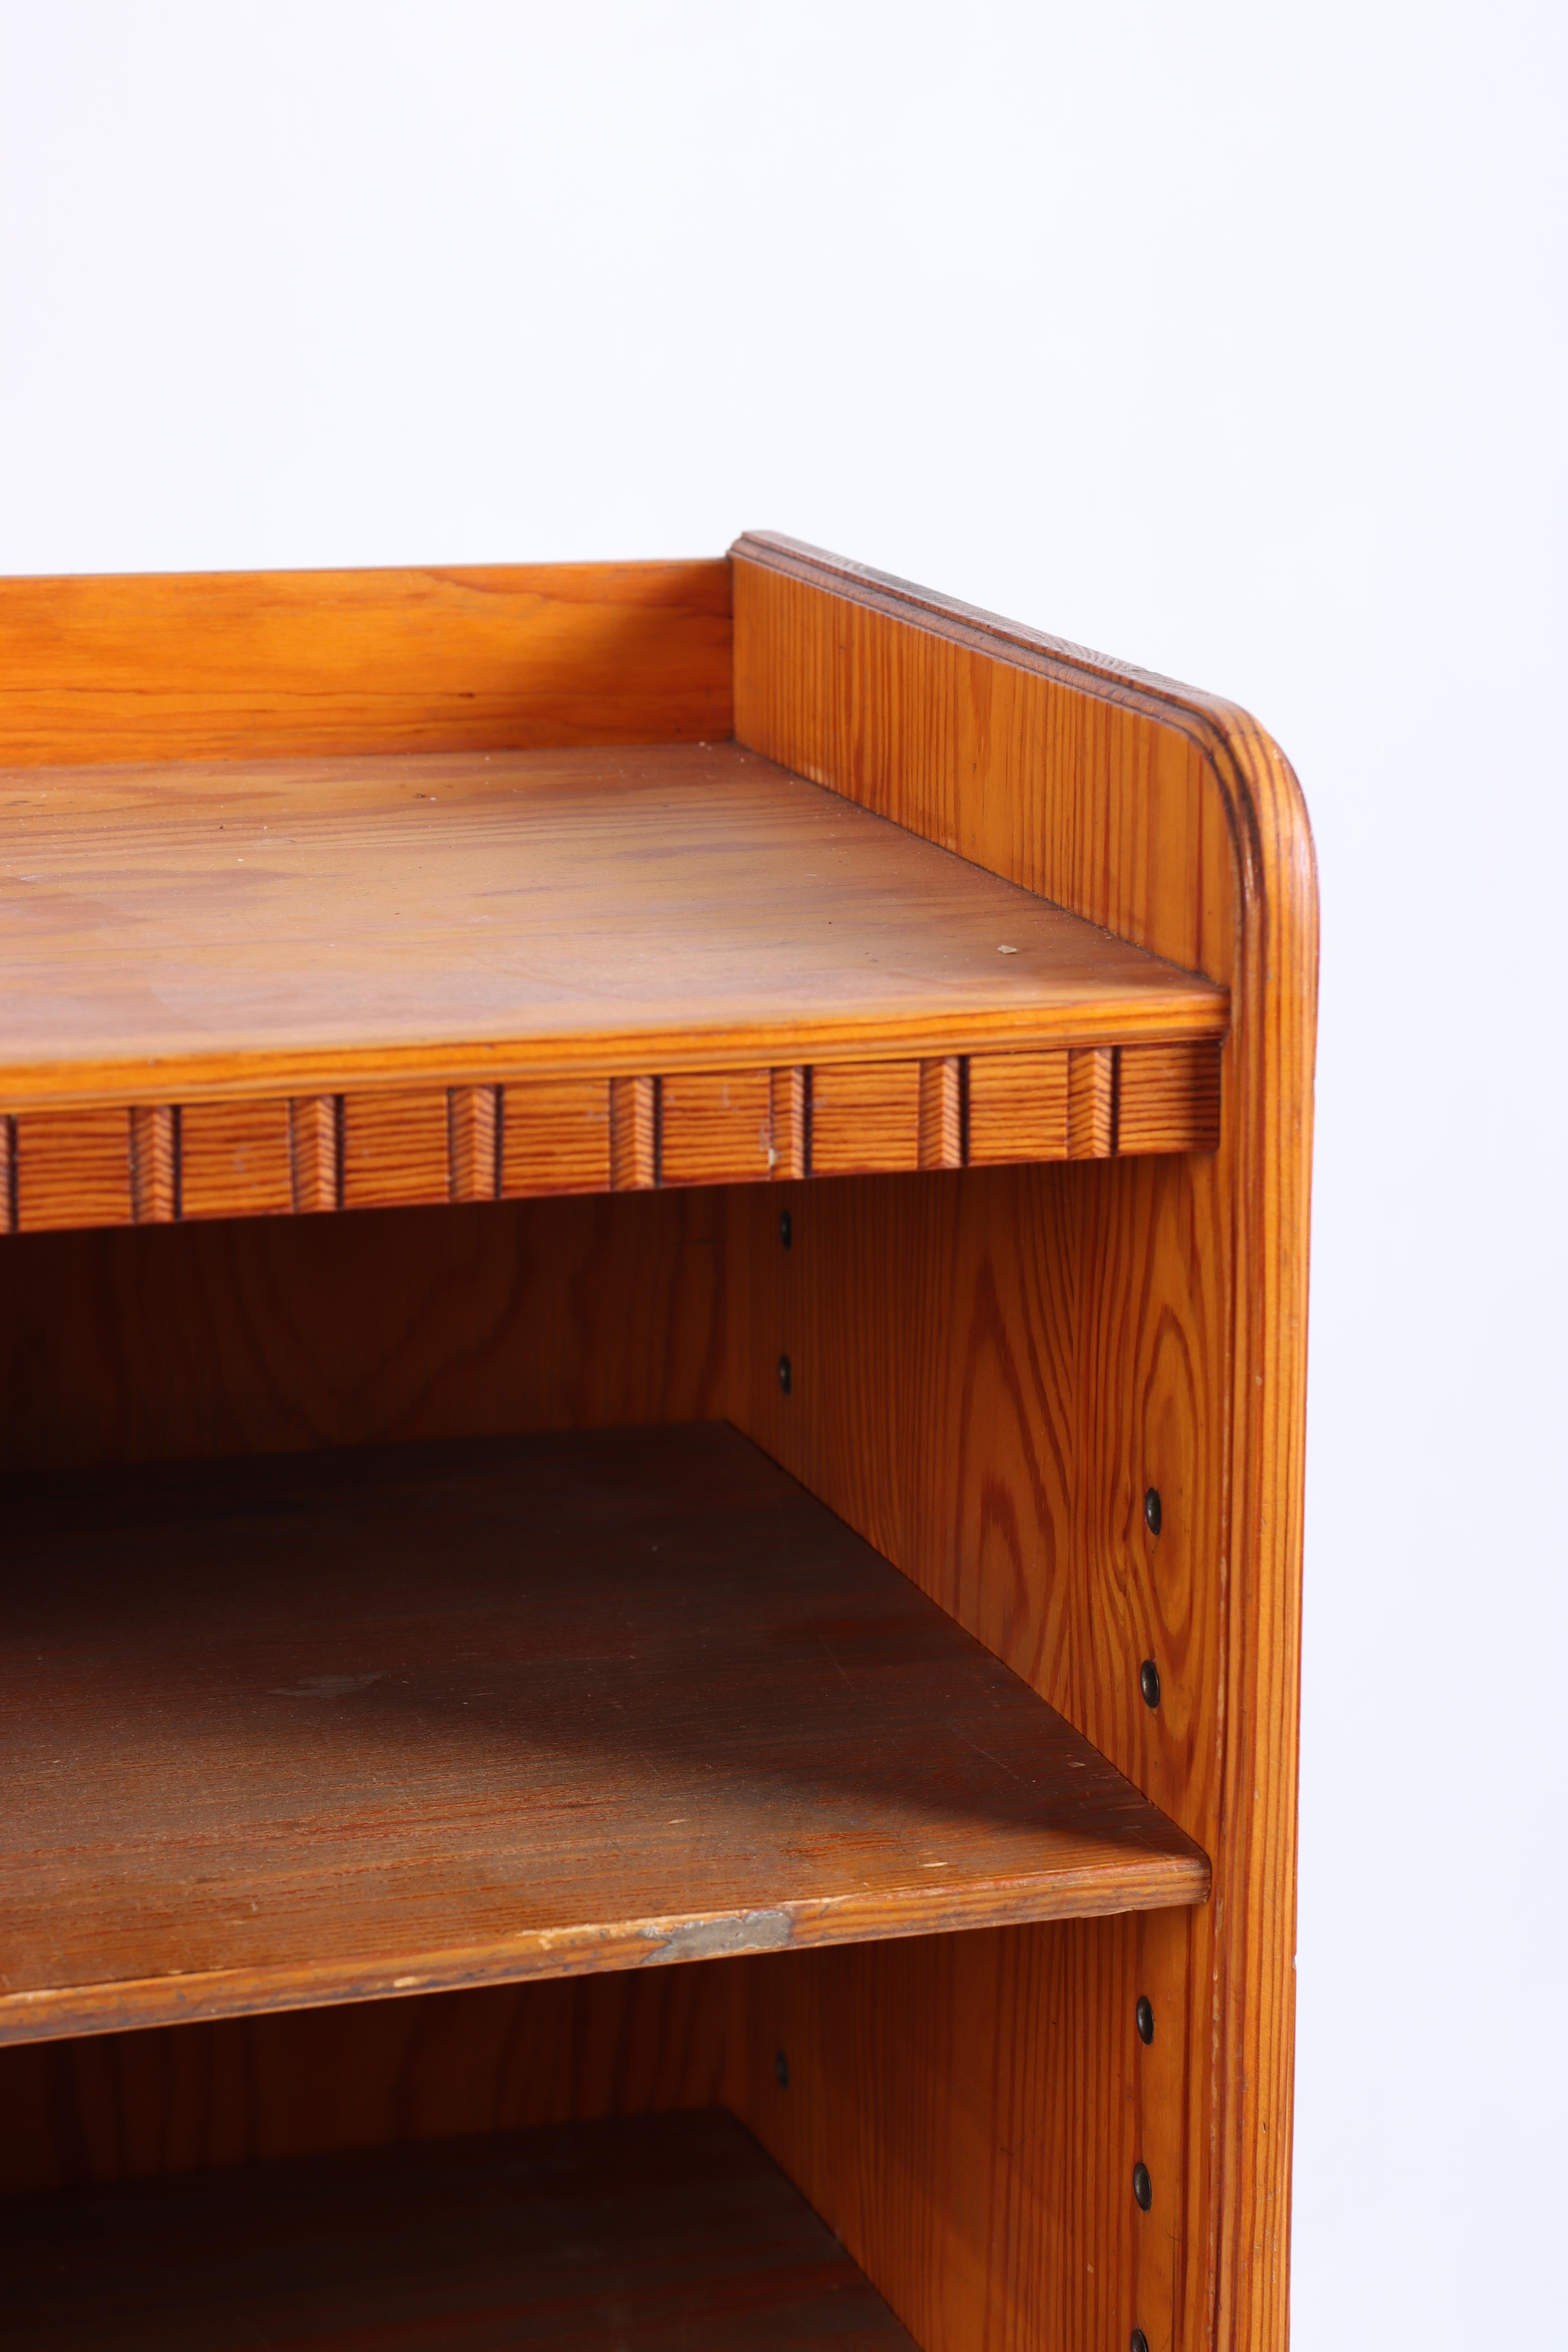 Bookcase in patinated solid pine. Designed by MAA. Martin Nyrop as interior for Copenhagen town hall in 1905. Made in Denmark by Cabinetmaker Rud Rasmussen cabinetmakers. Great original condition.

